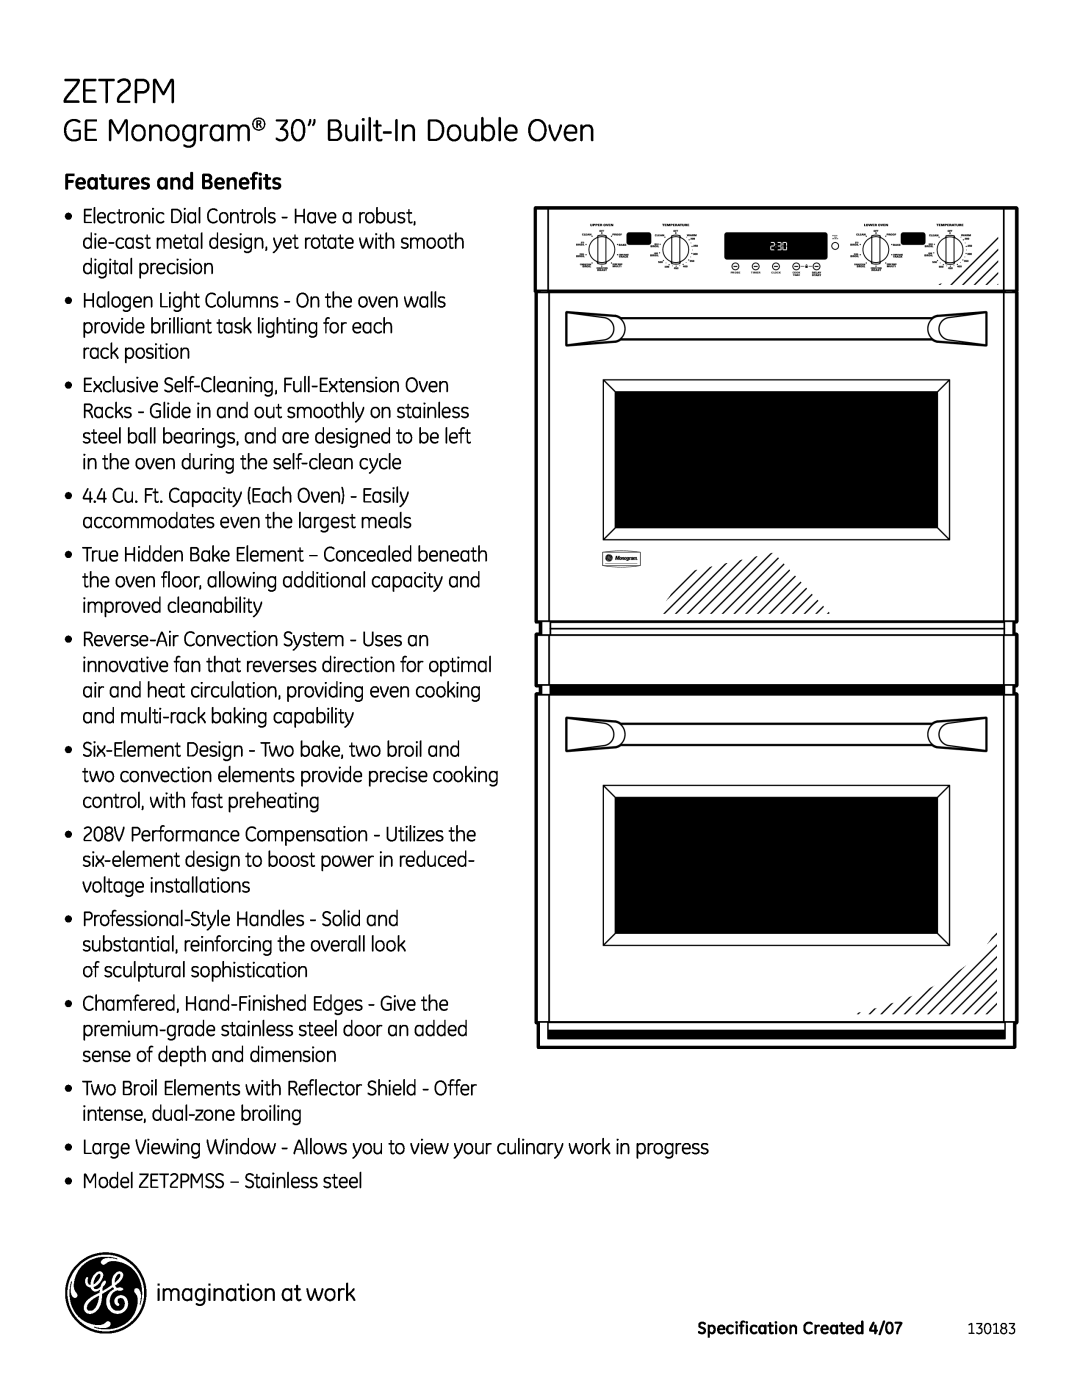 GE Monogram ZET2PM dimensions Features and Benefits, GE Monogram 30” Built-InDouble Oven 